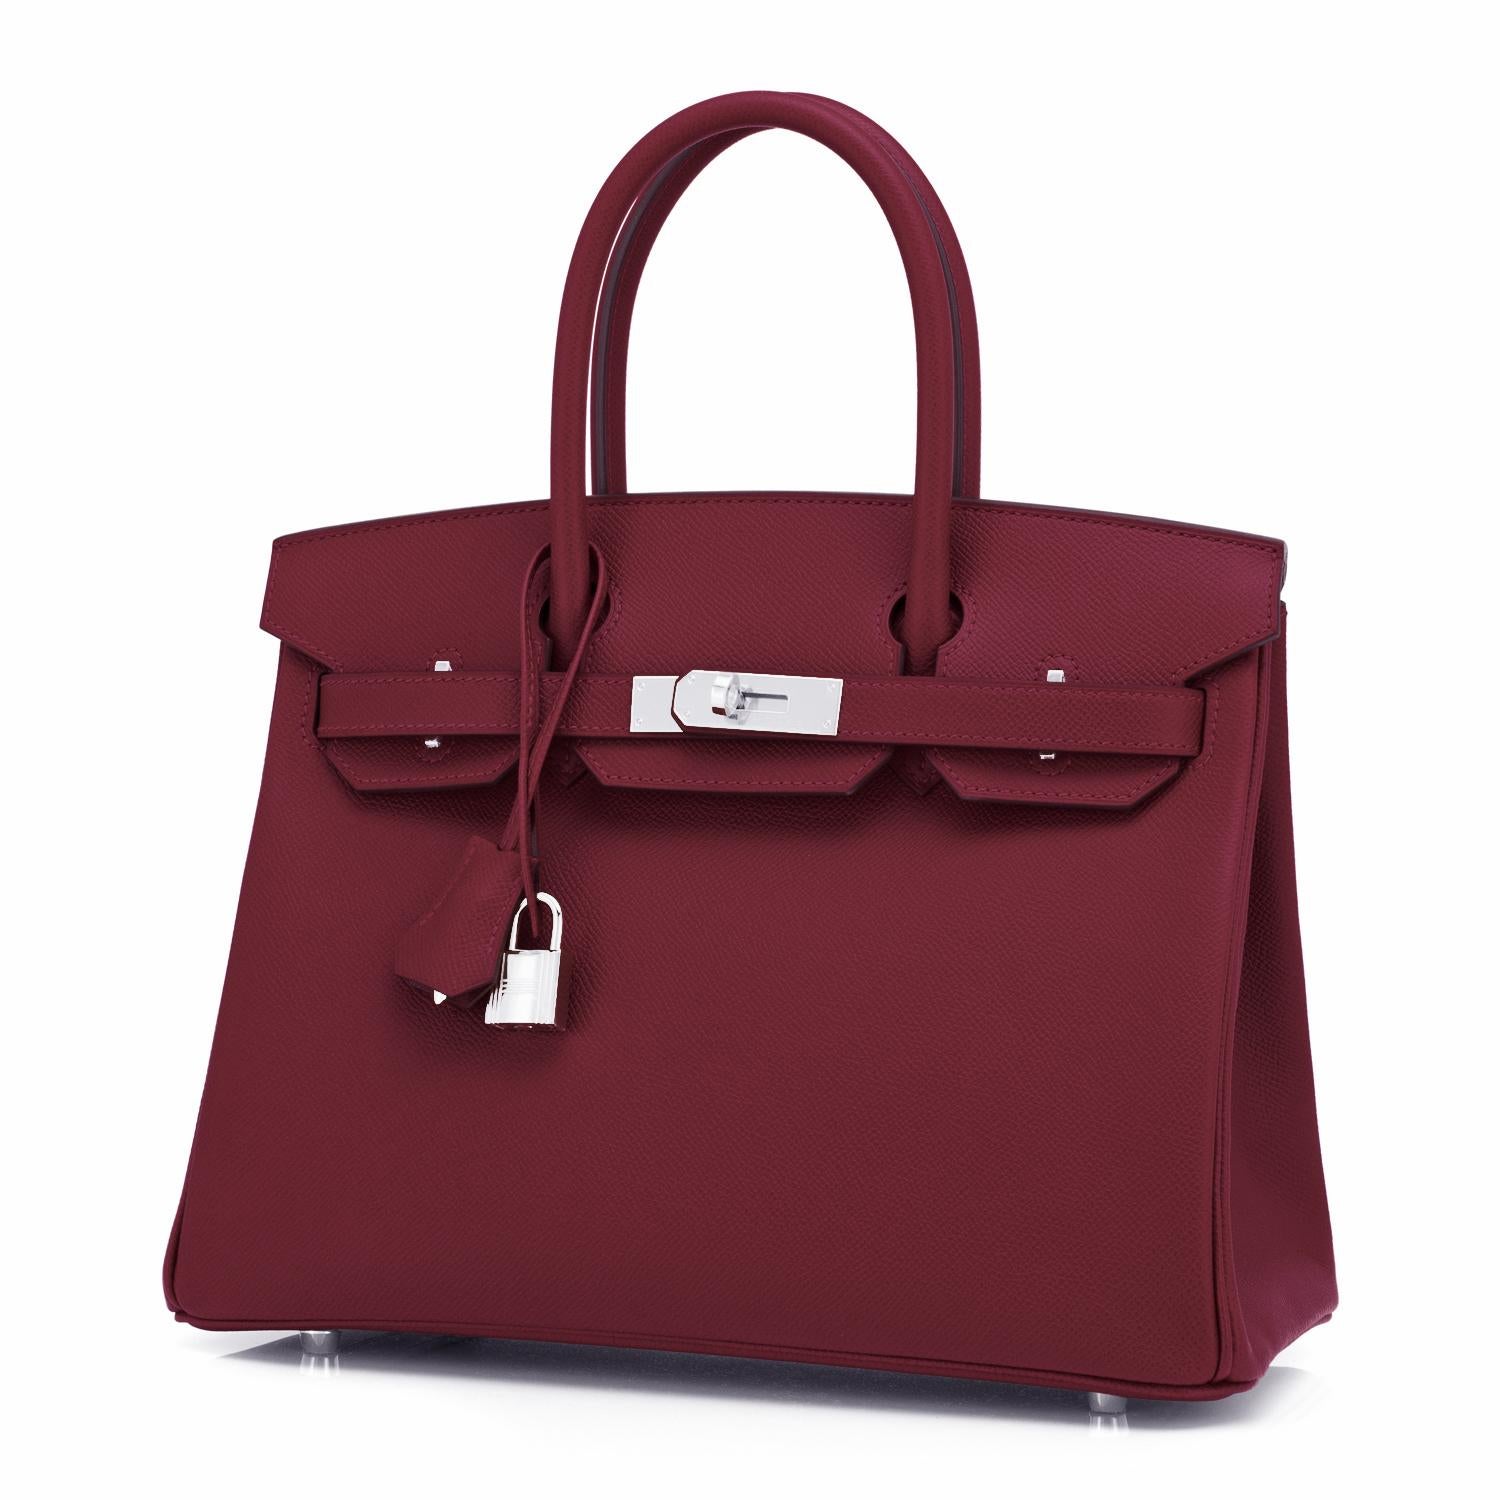 Hermes Rouge H 30cm Birkin Epsom Palladium Y Stamp, 2020
Devastatingly gorgeous!!
Brand New in Box.  Store Fresh.  Pristine Condition (with plastic on hardware).
Just purchased from Hermes store! Bag bears new interior 2020 Y Stamp.
Perfect gift!